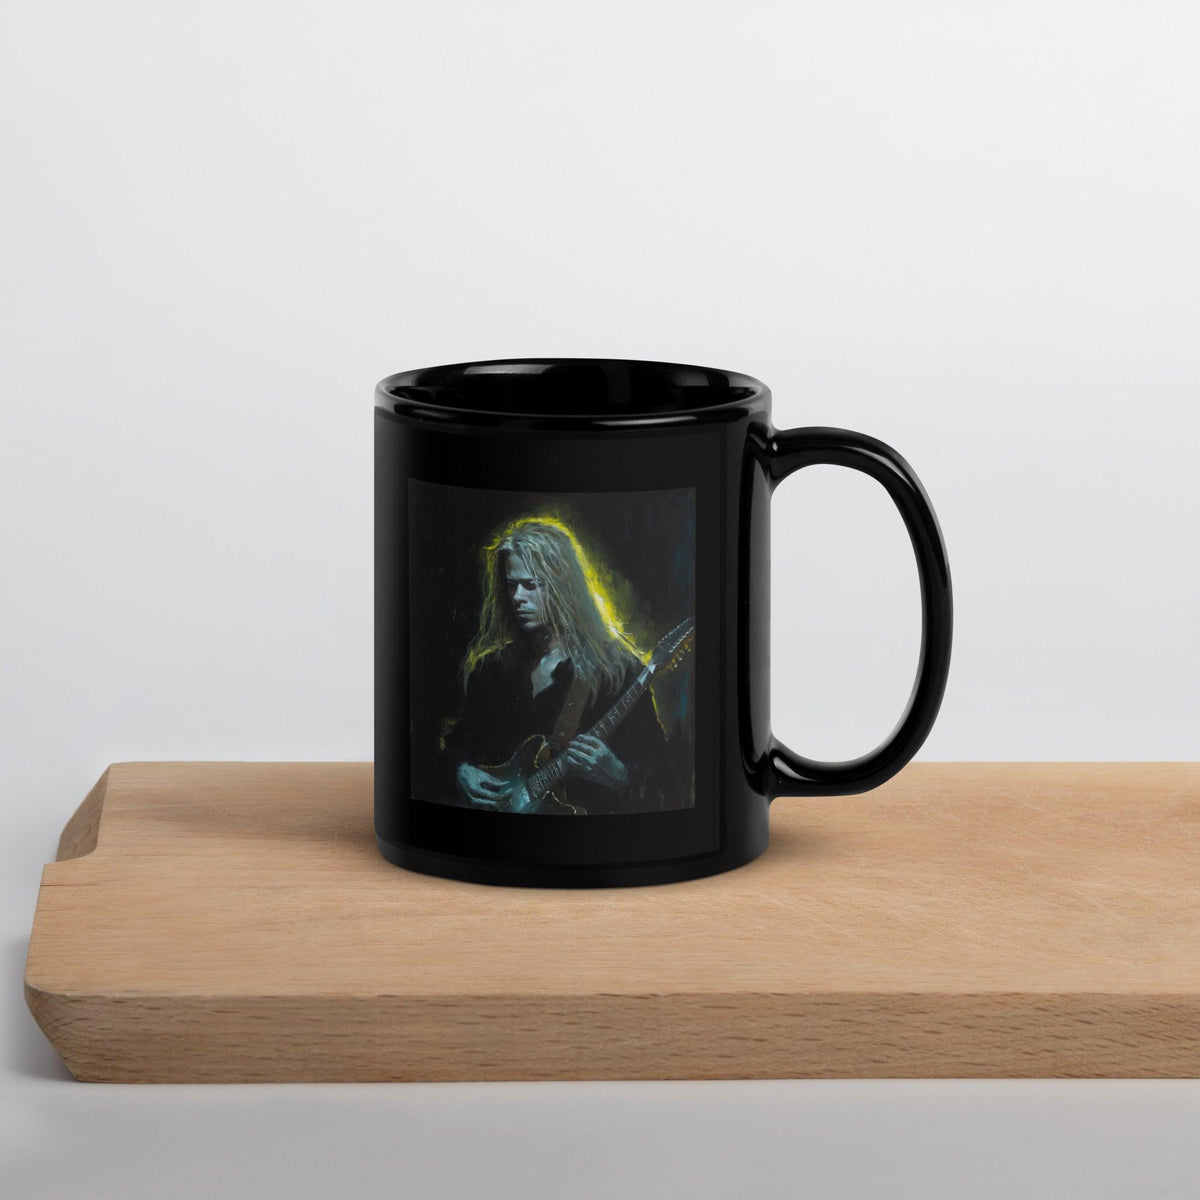 NS-816 black glossy coffee mug on a wooden table.